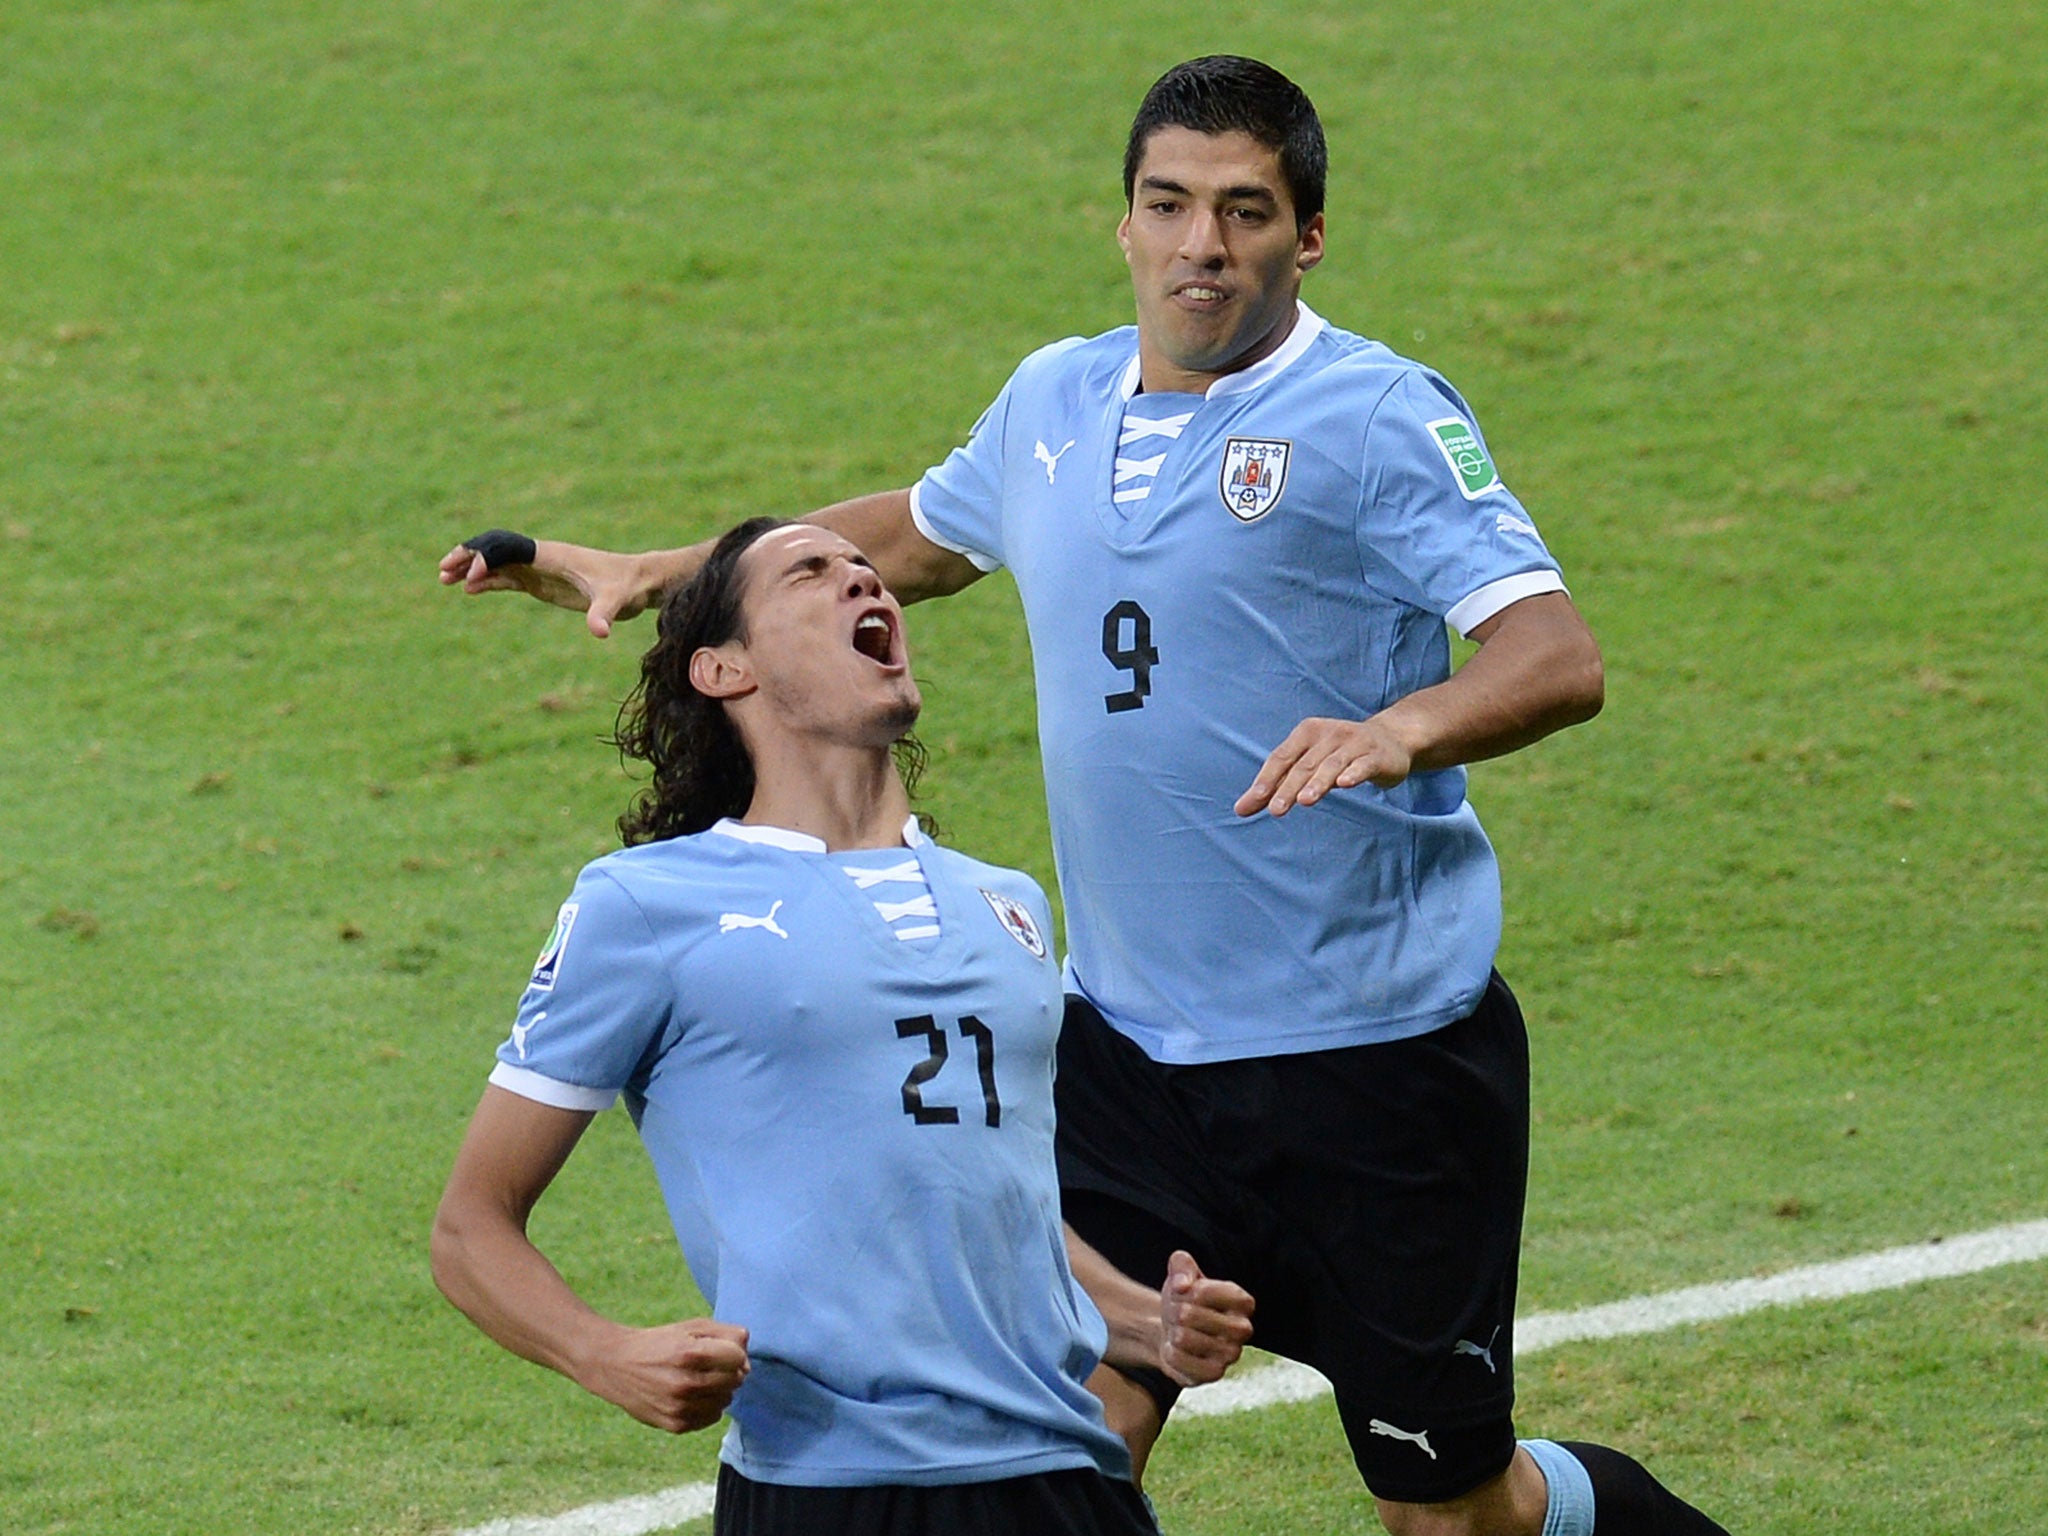 Edinson Cavani and Luis Suarez celebrate after the former scores for Uruguay in the 2013 Confederations Cup semi-final defeat by Brazil